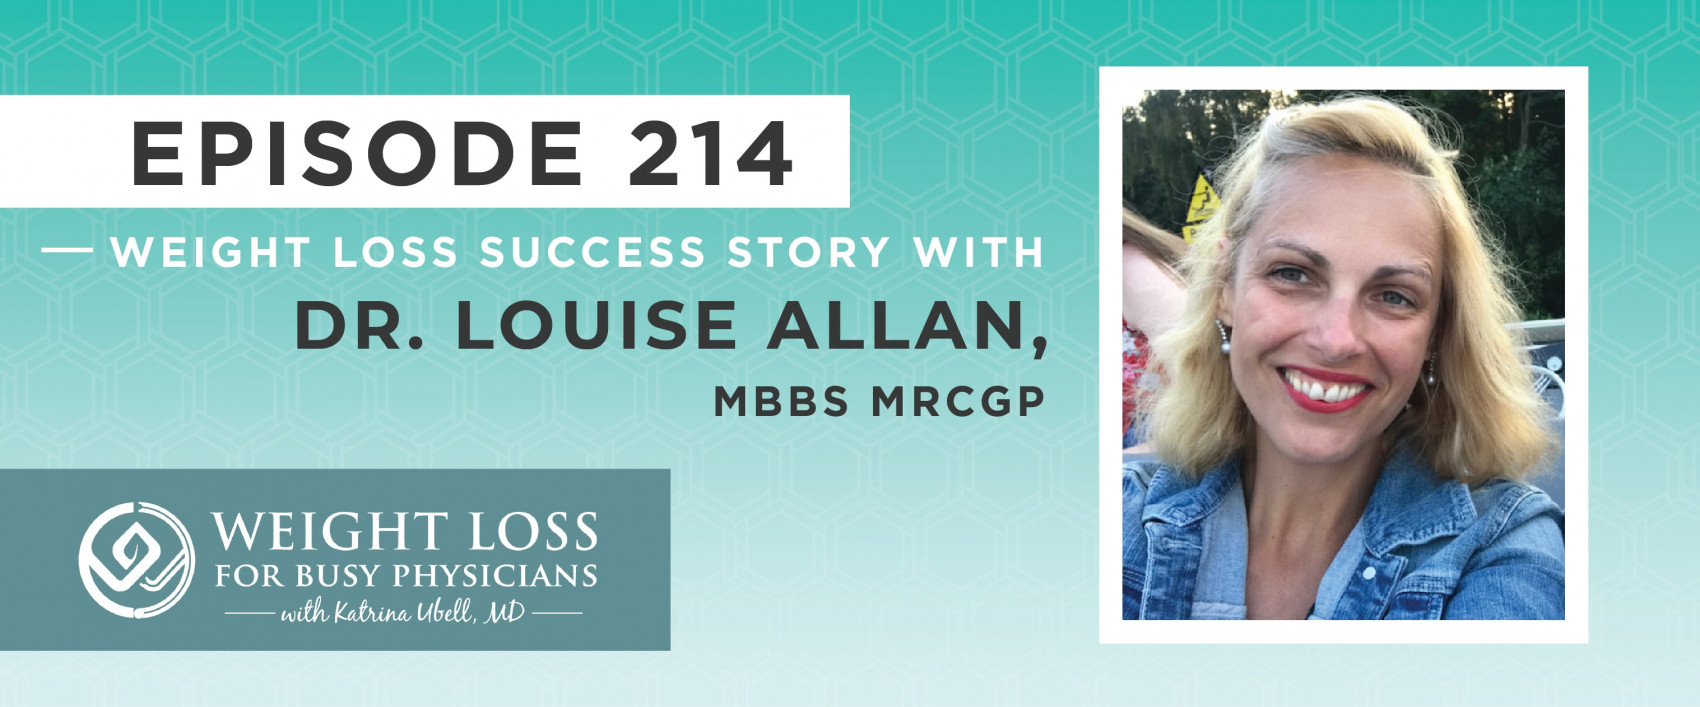 Ep #214: Weight Loss Success Story: Dr. Louise Allan MBBS MRCGP